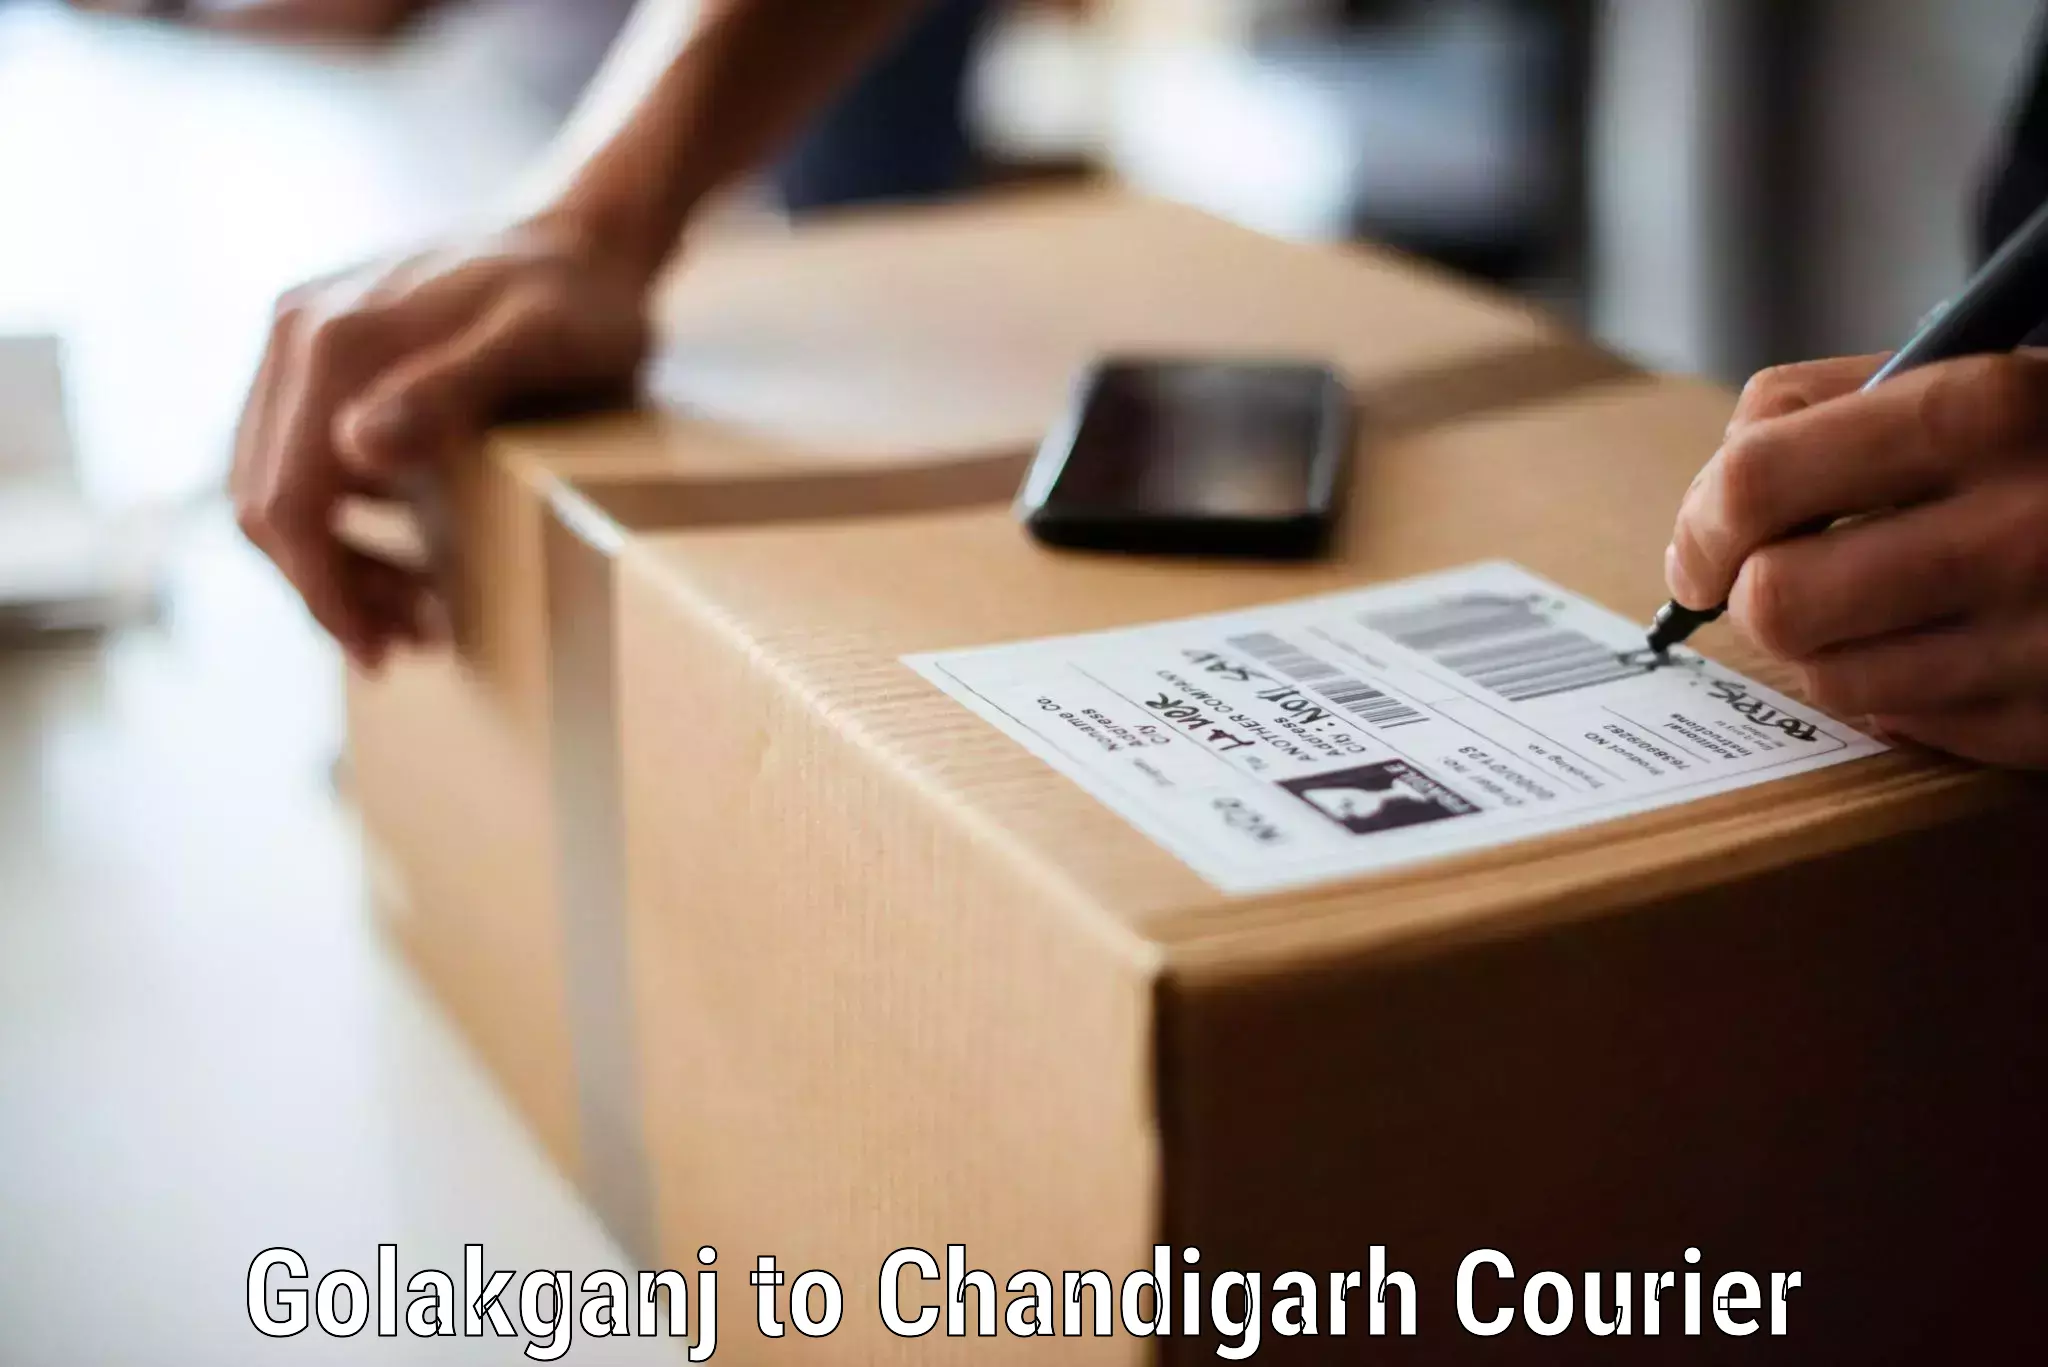 Efficient furniture movers Golakganj to Chandigarh